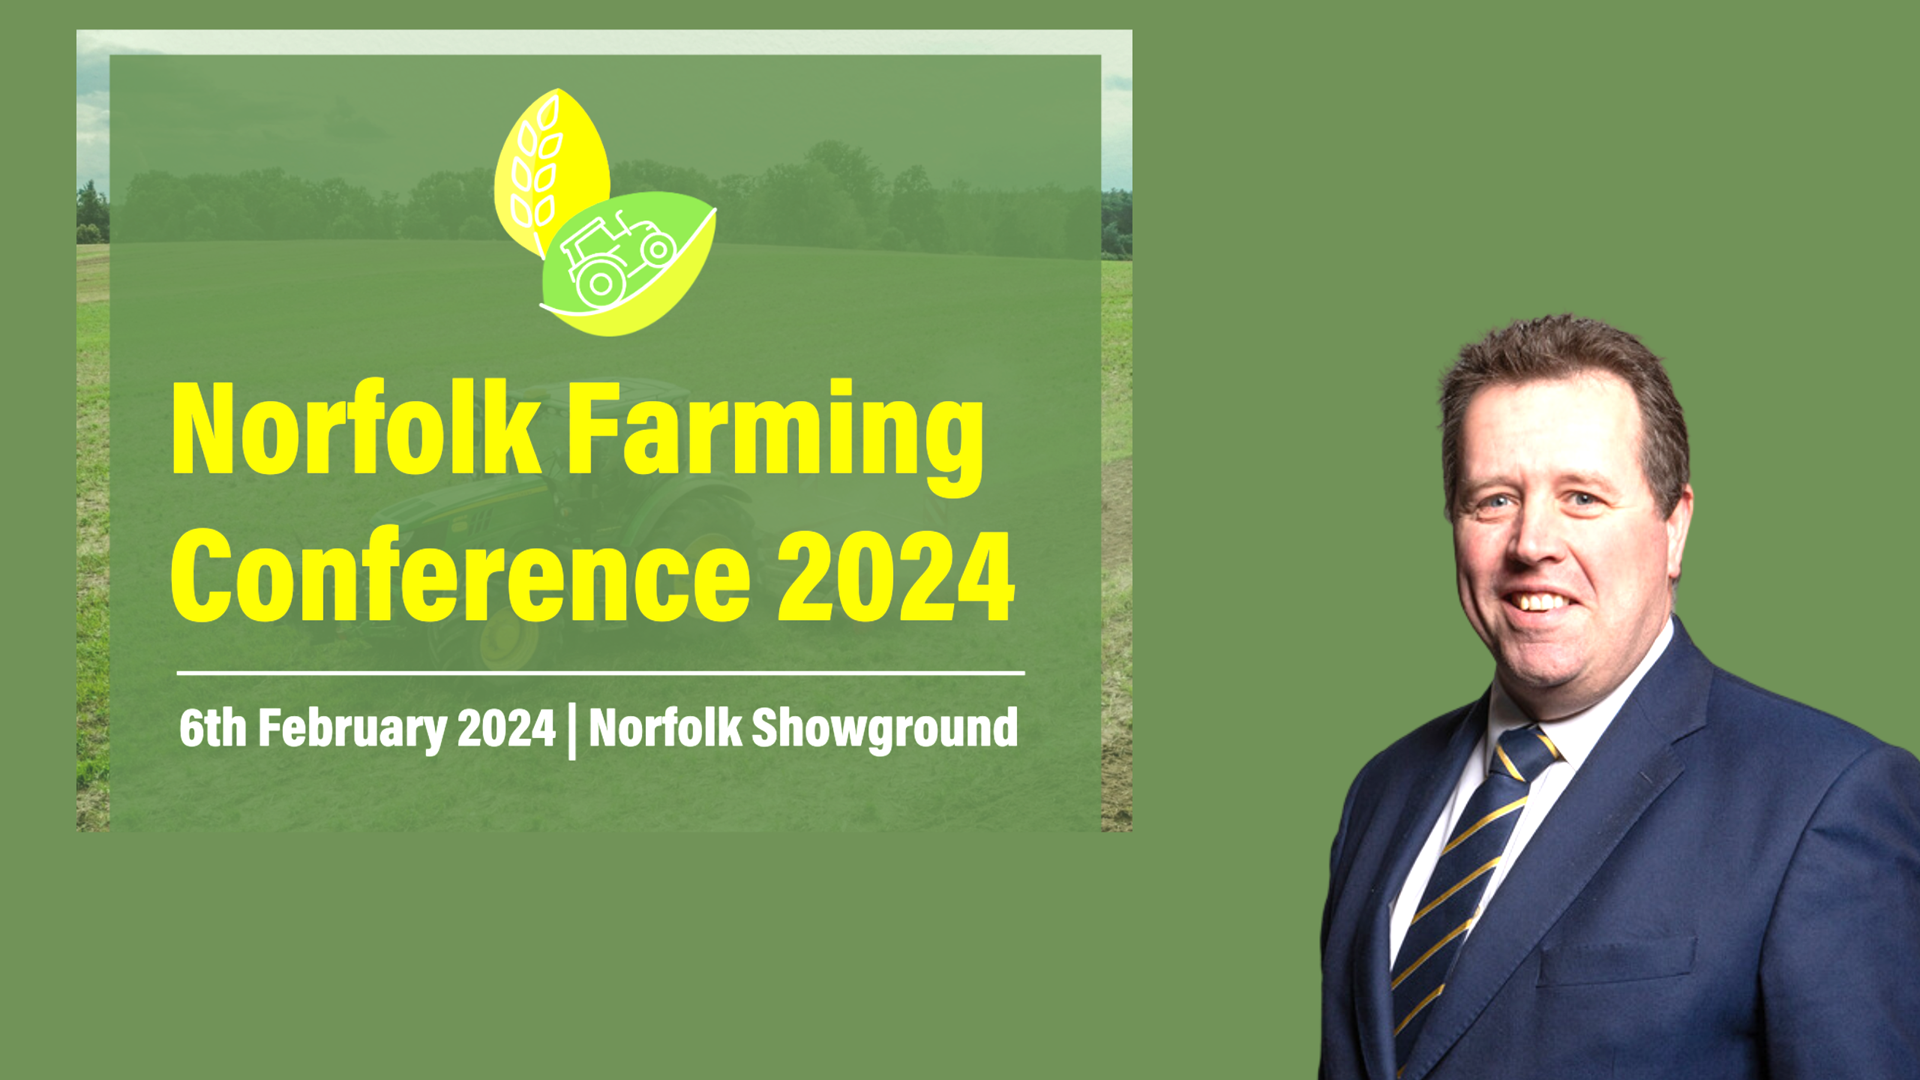 'We rely on you to feed the nation': Farming Minister speaks ahead of conference